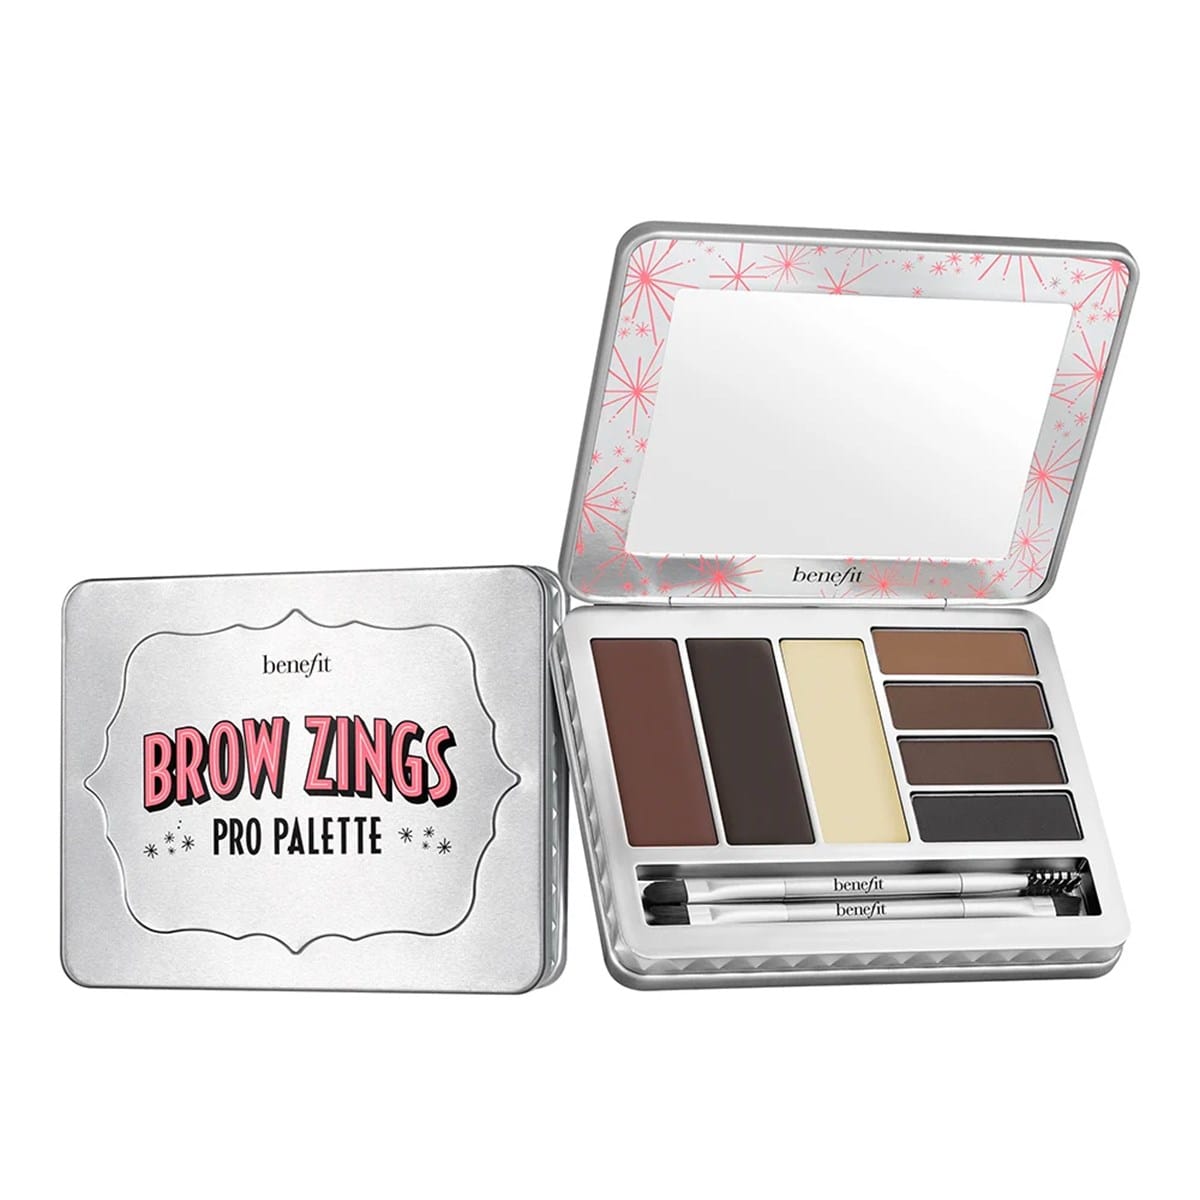 Brow Zings Pro Palette by Benefit